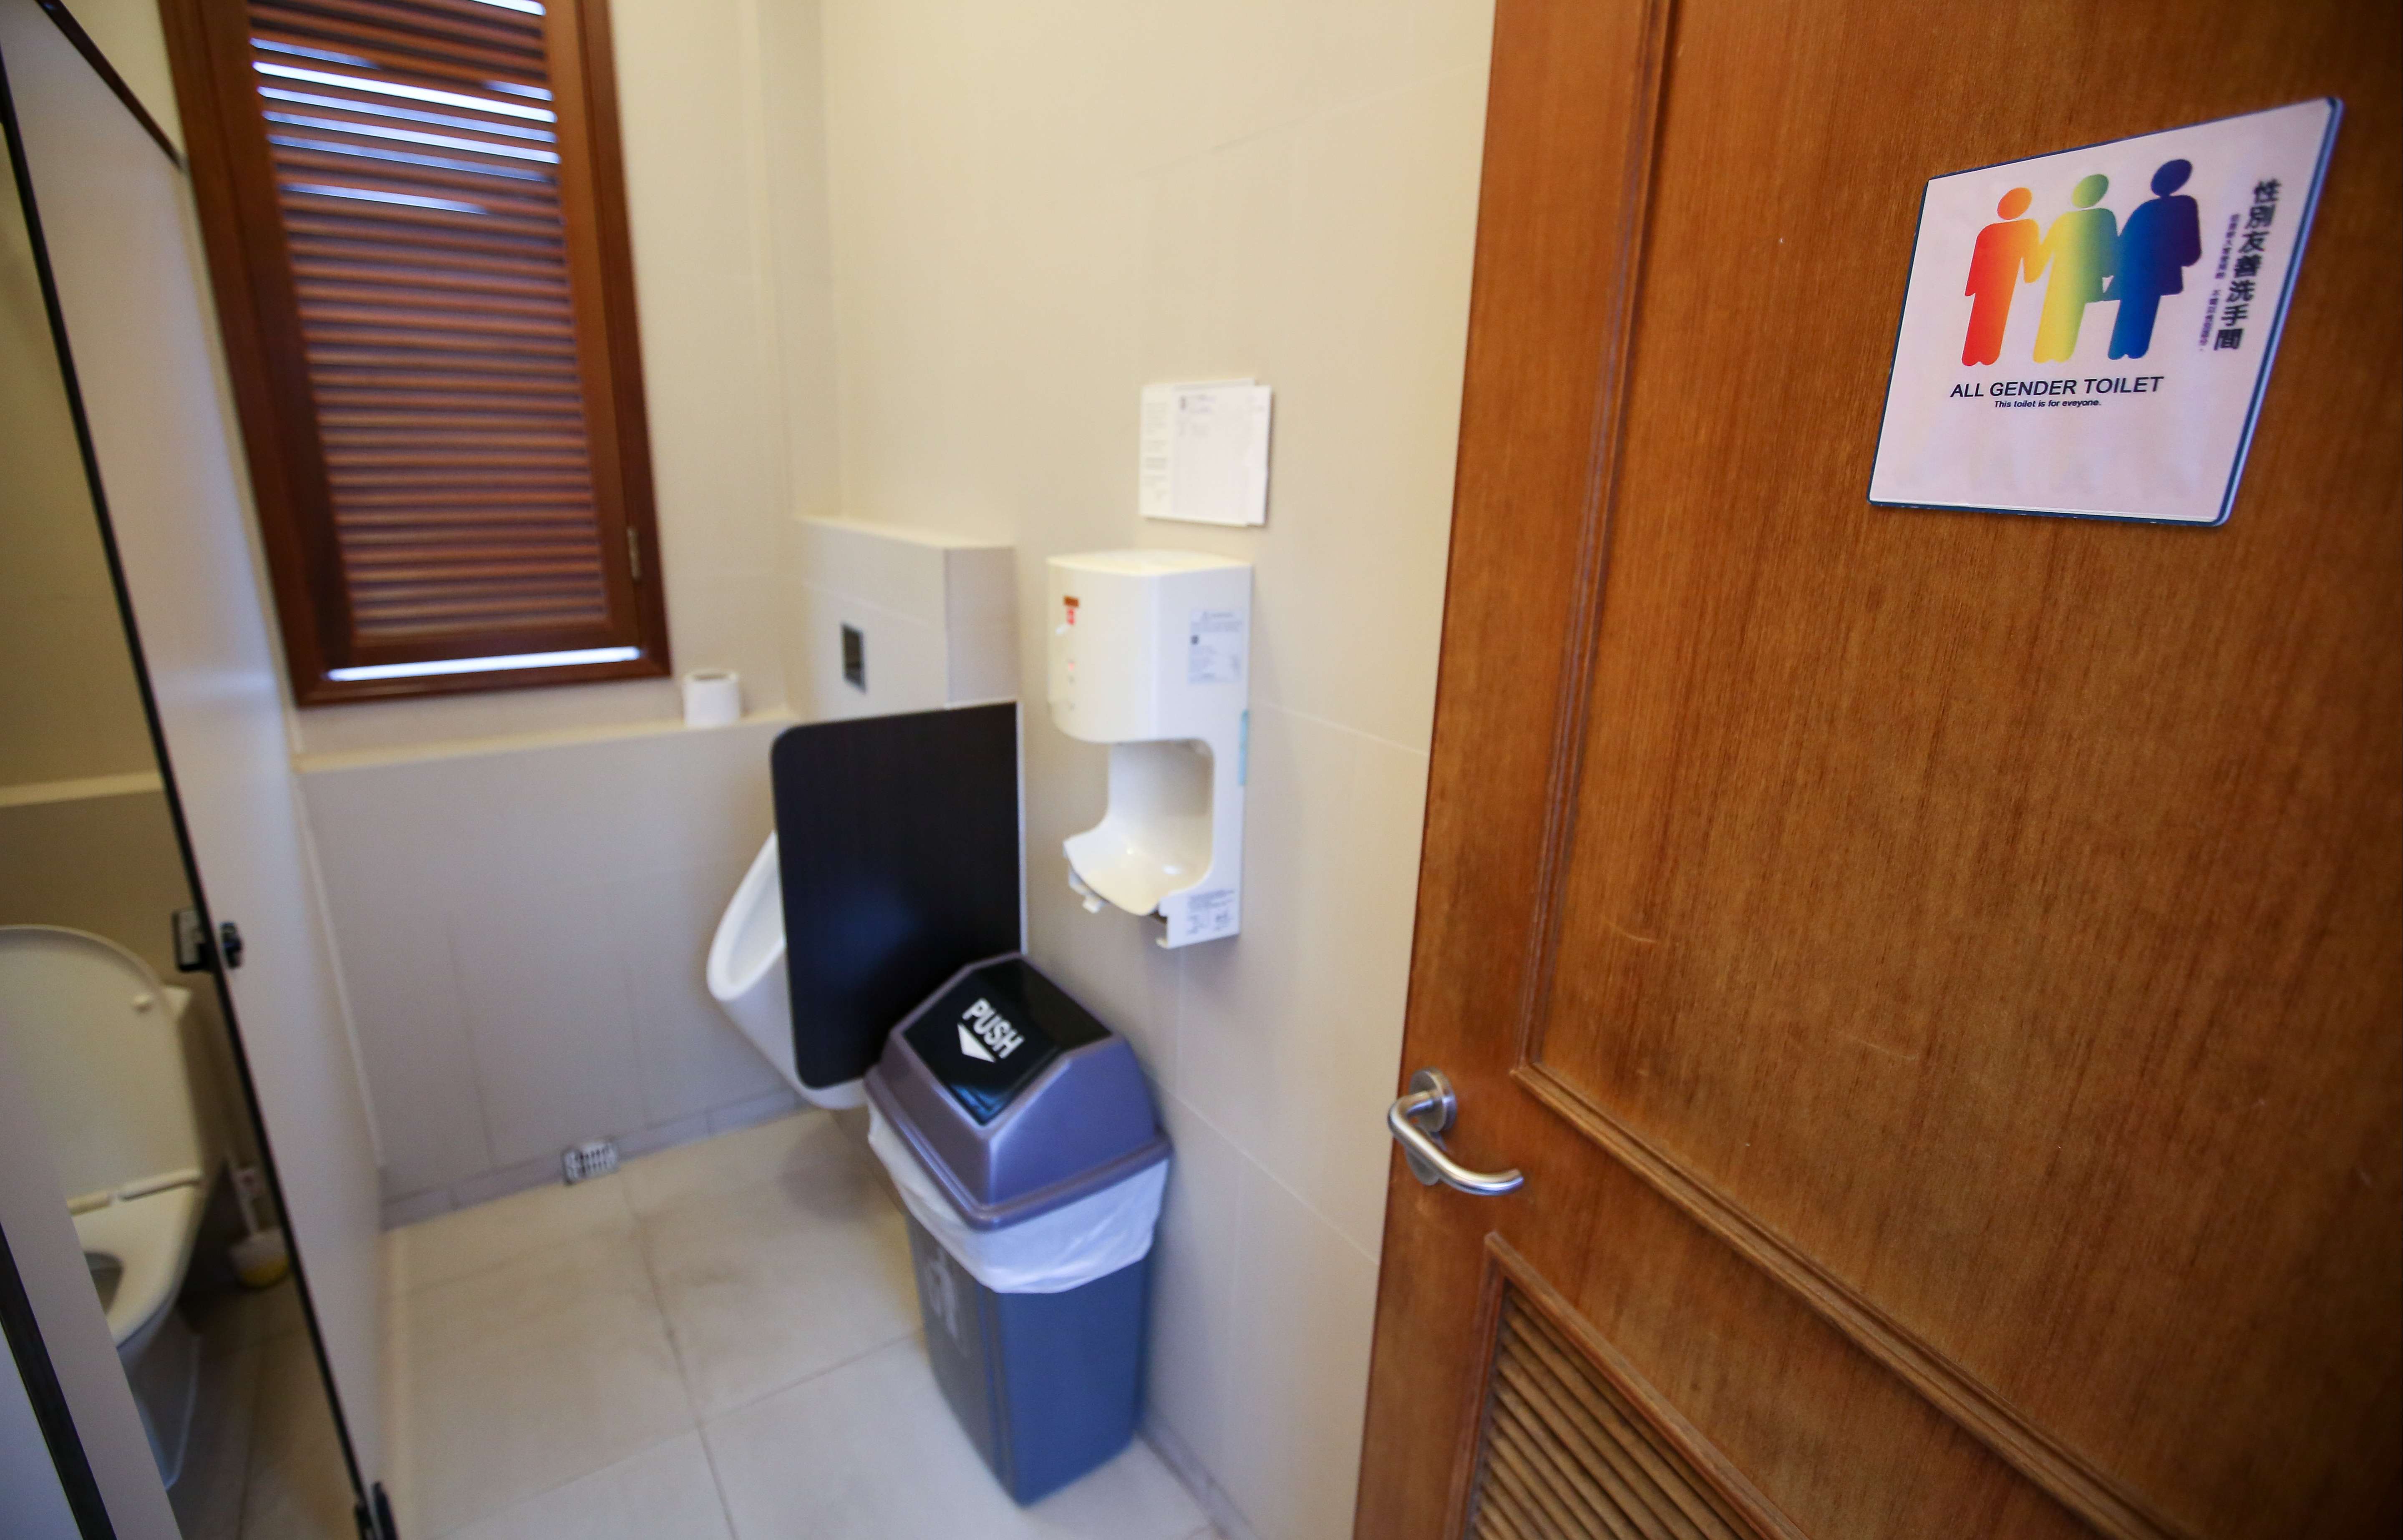 All-gender bathrooms have been introduced on the University of Hong Kong campus. Photo: Edward Wong